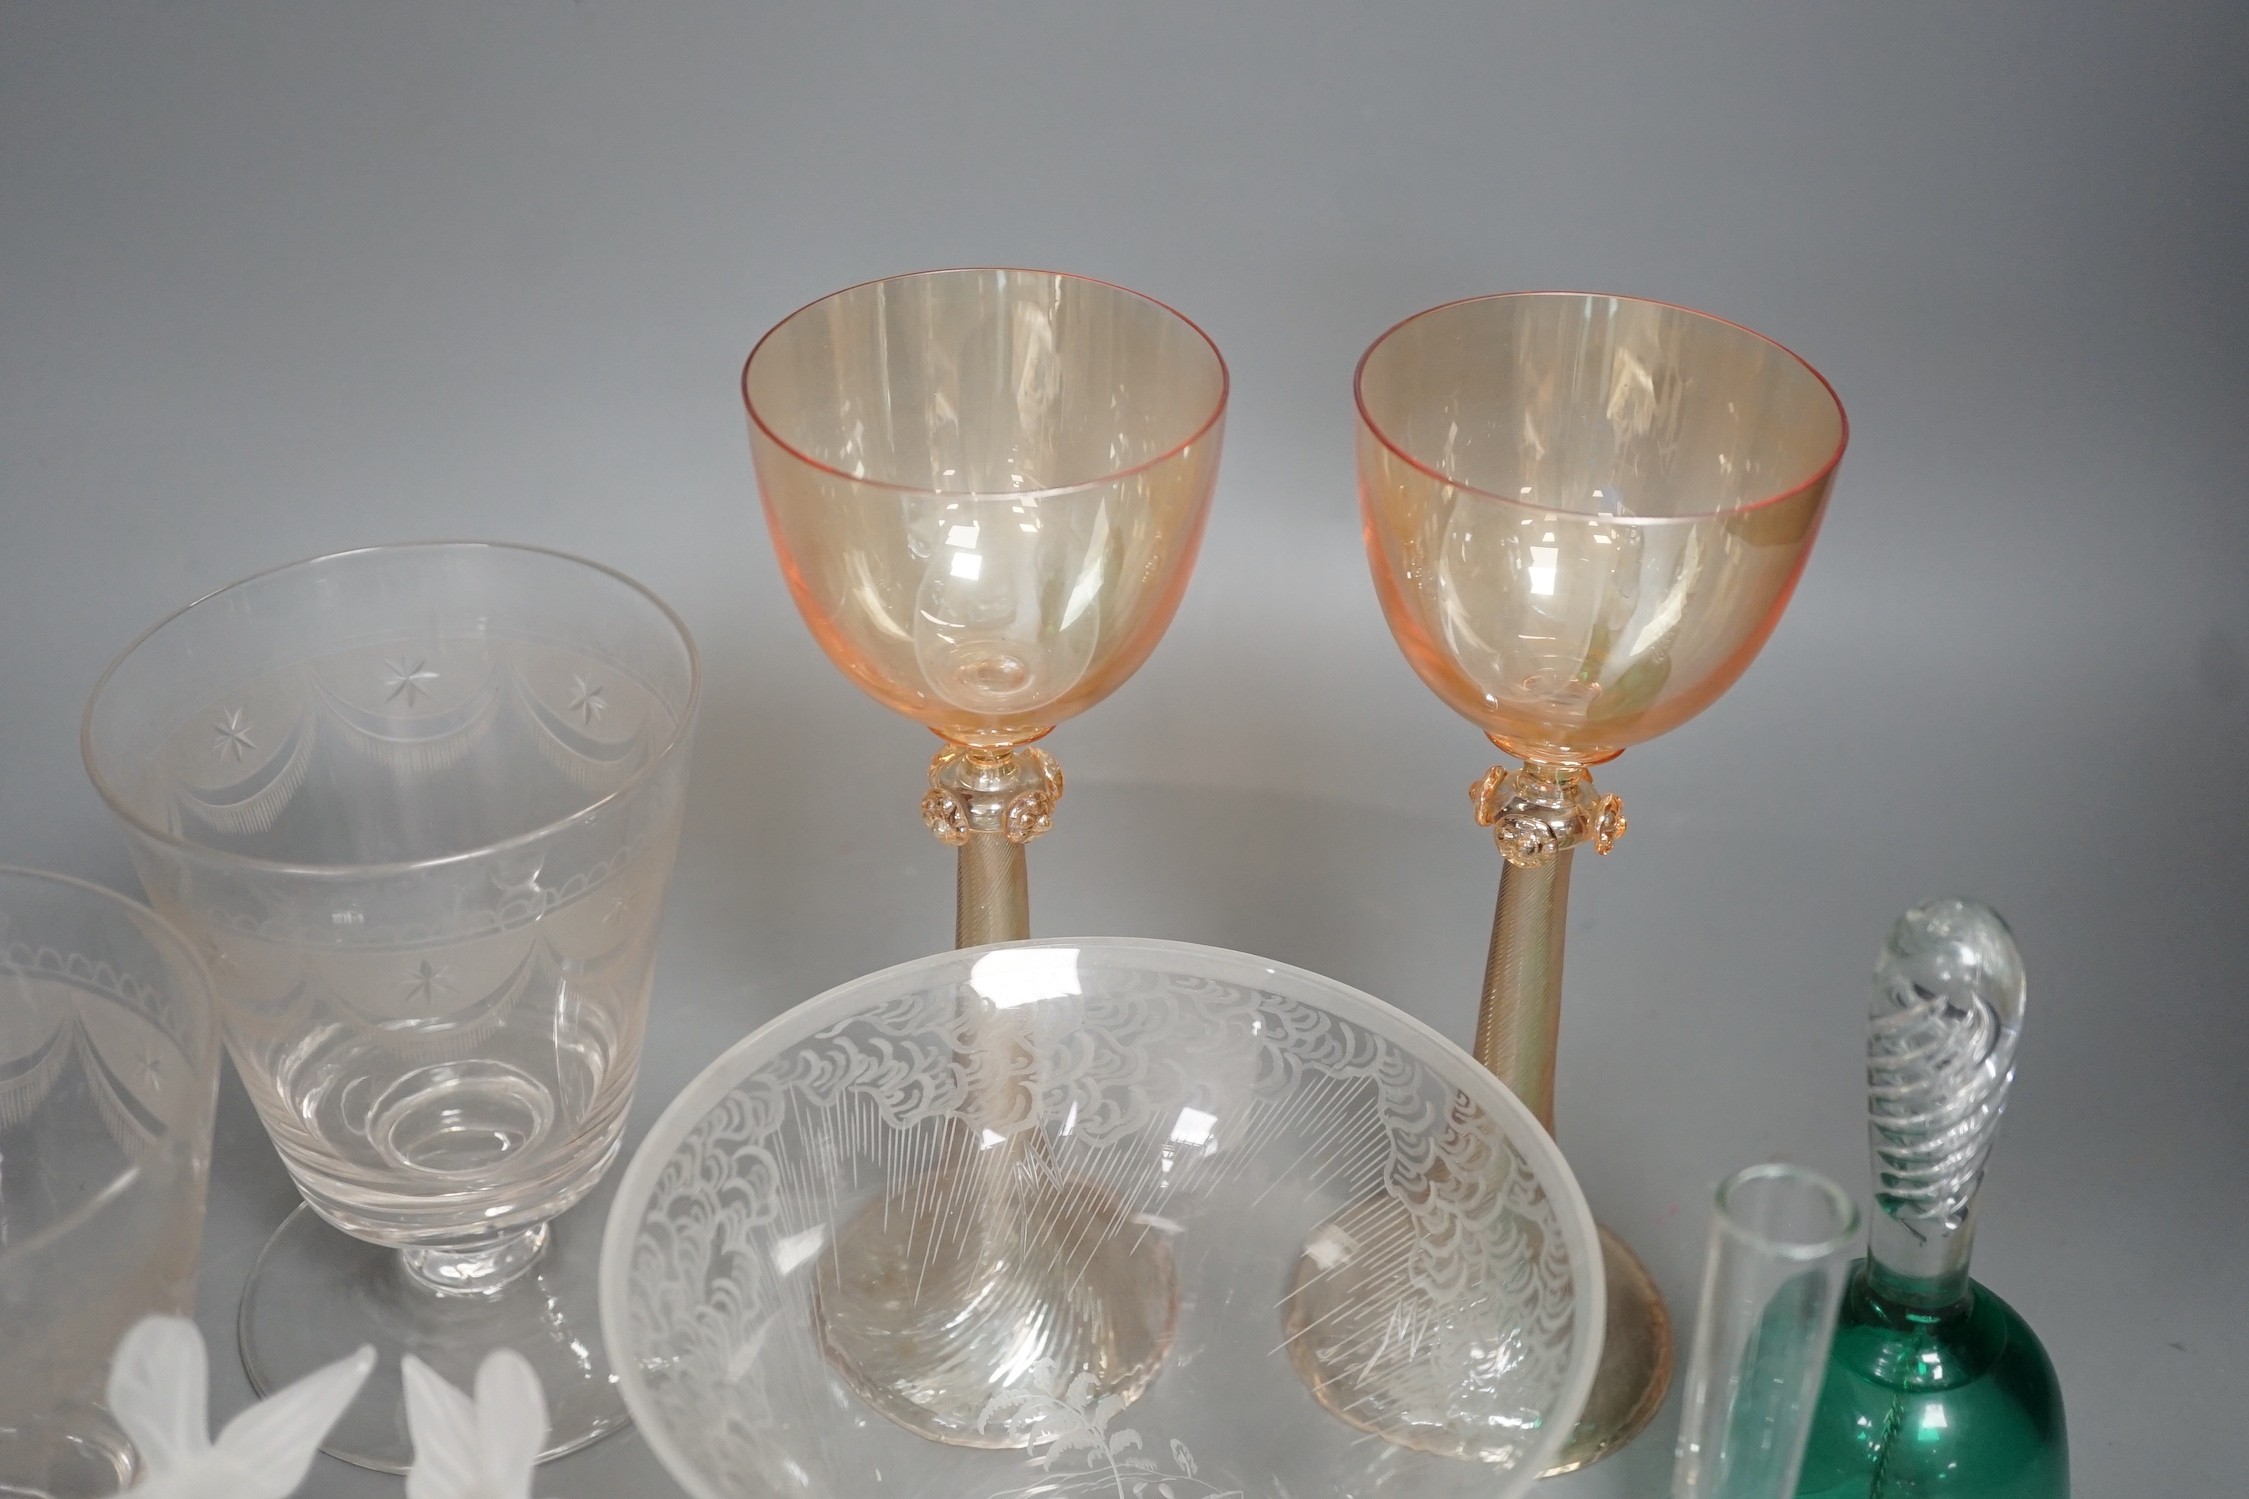 Two Venetian lustre glass goblets, a pair of rummers and sundry glassware, goblets 20cm high